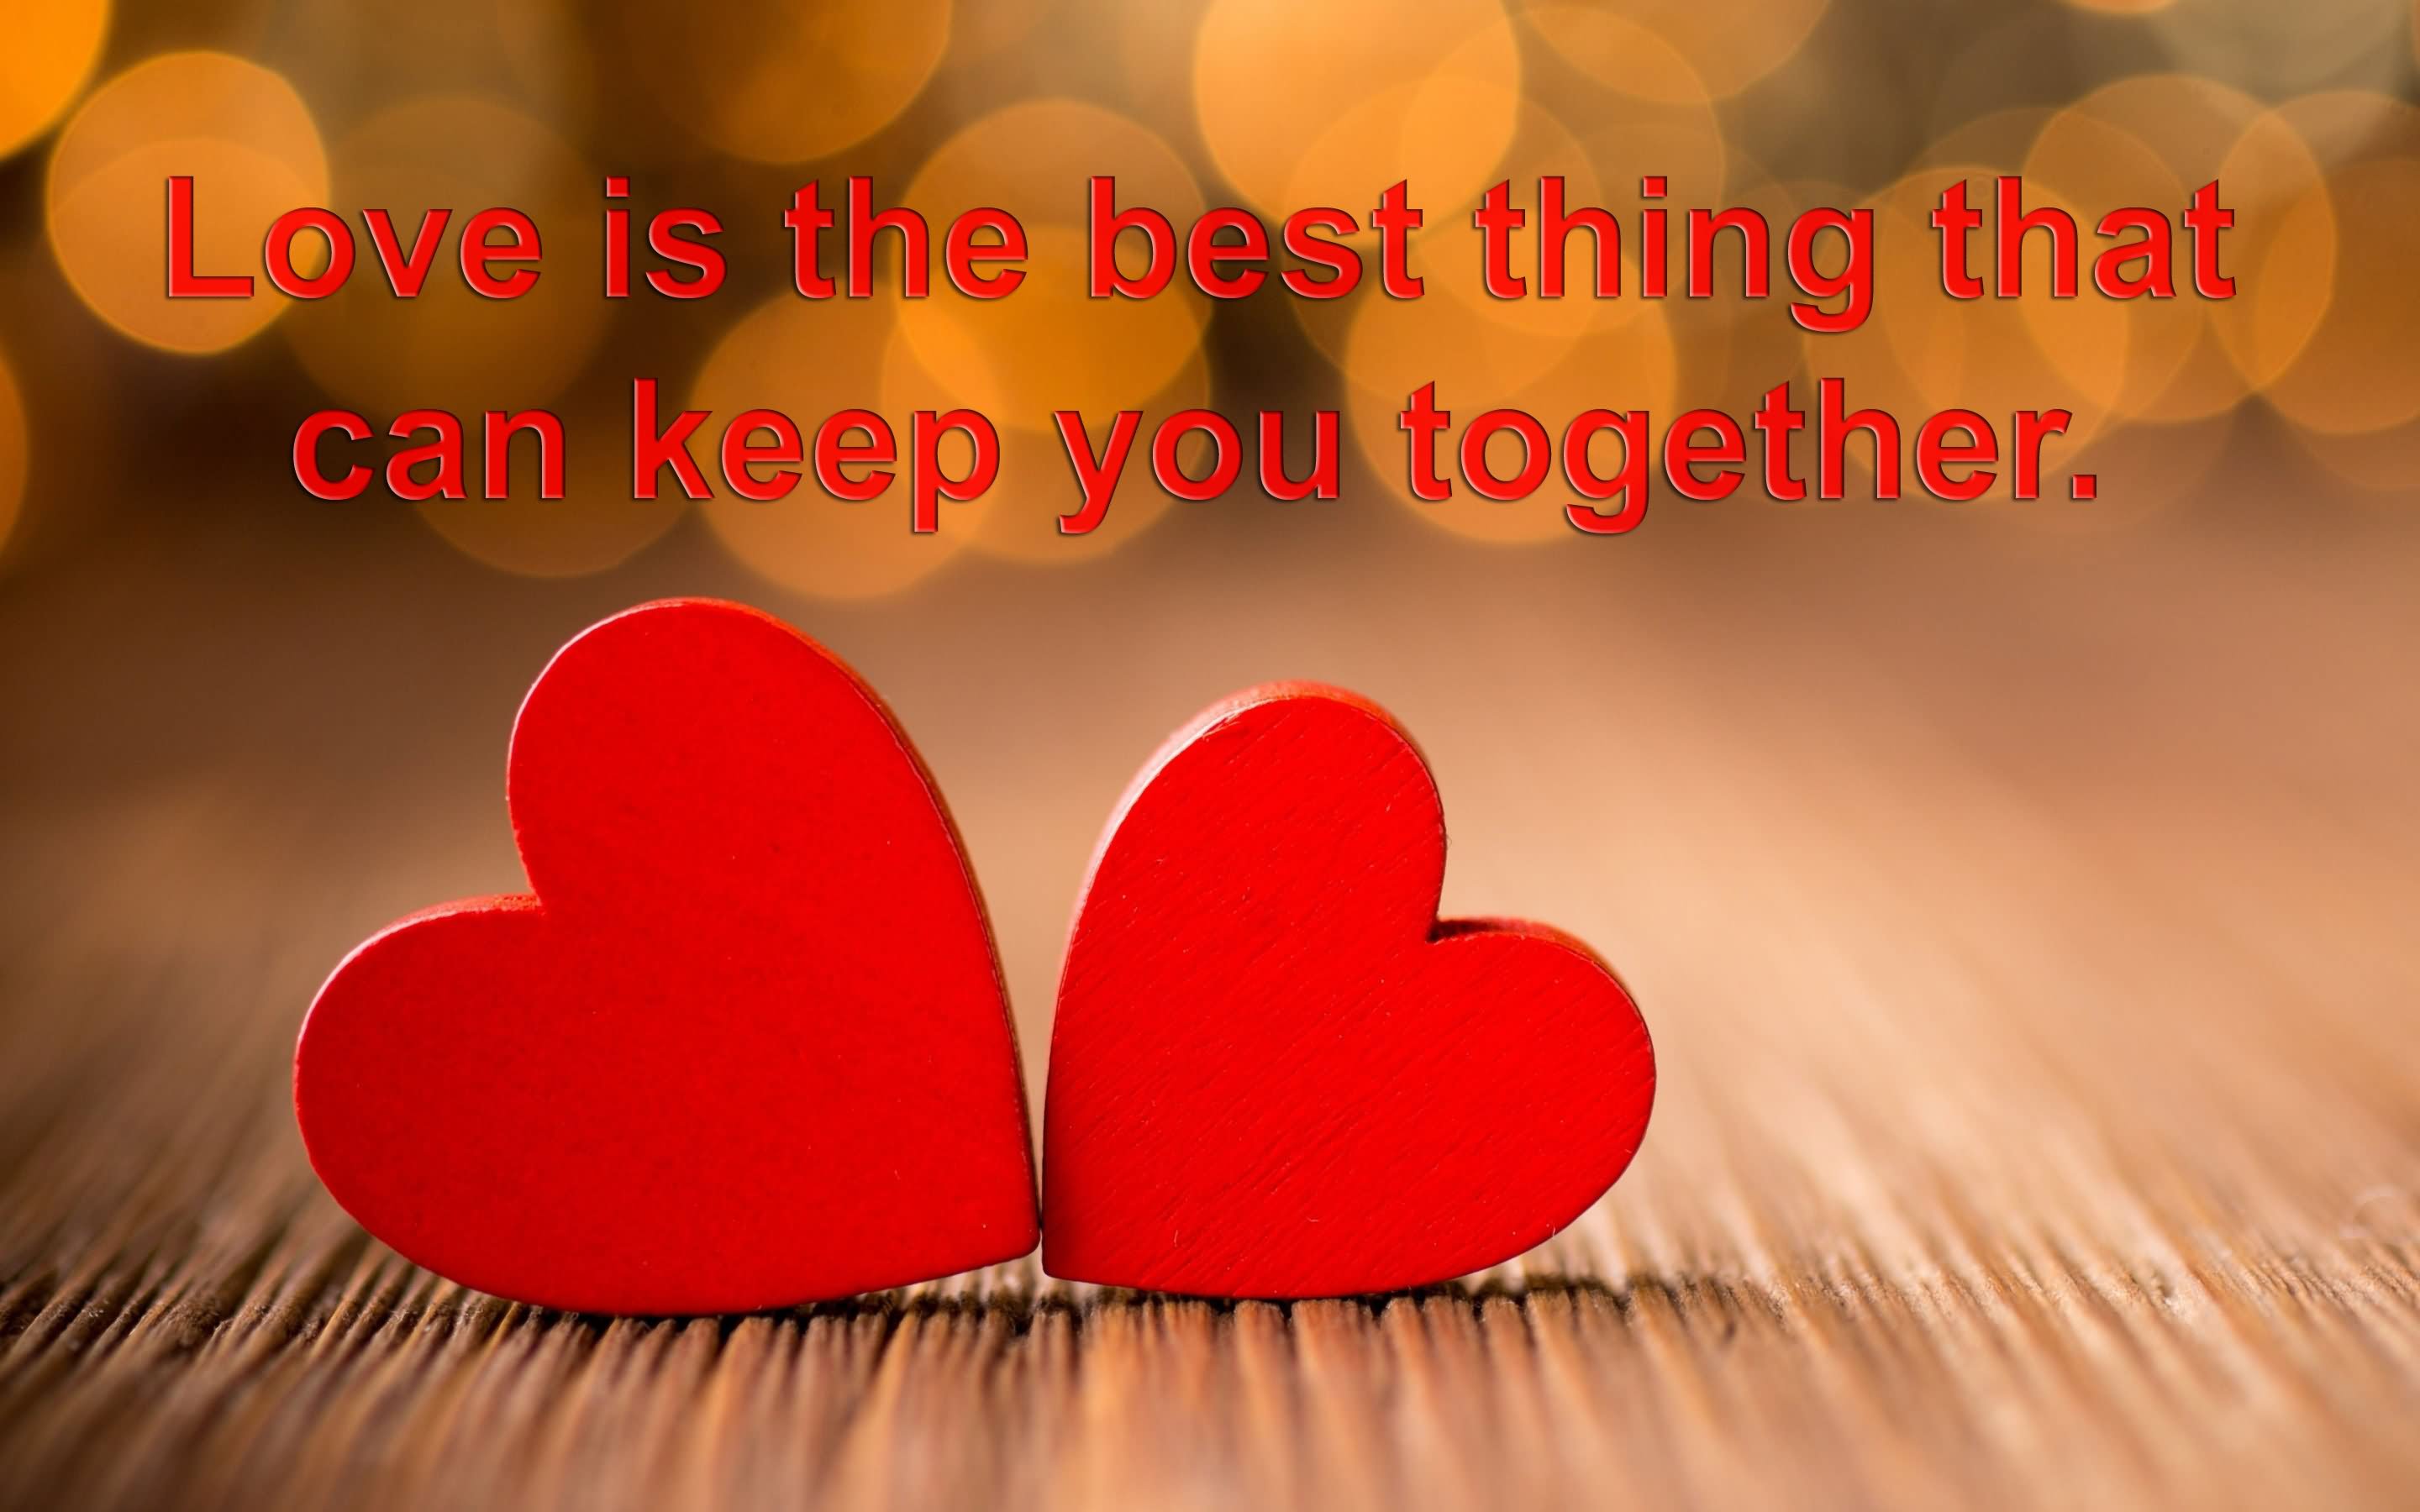 Love is the best thing that can keep you together